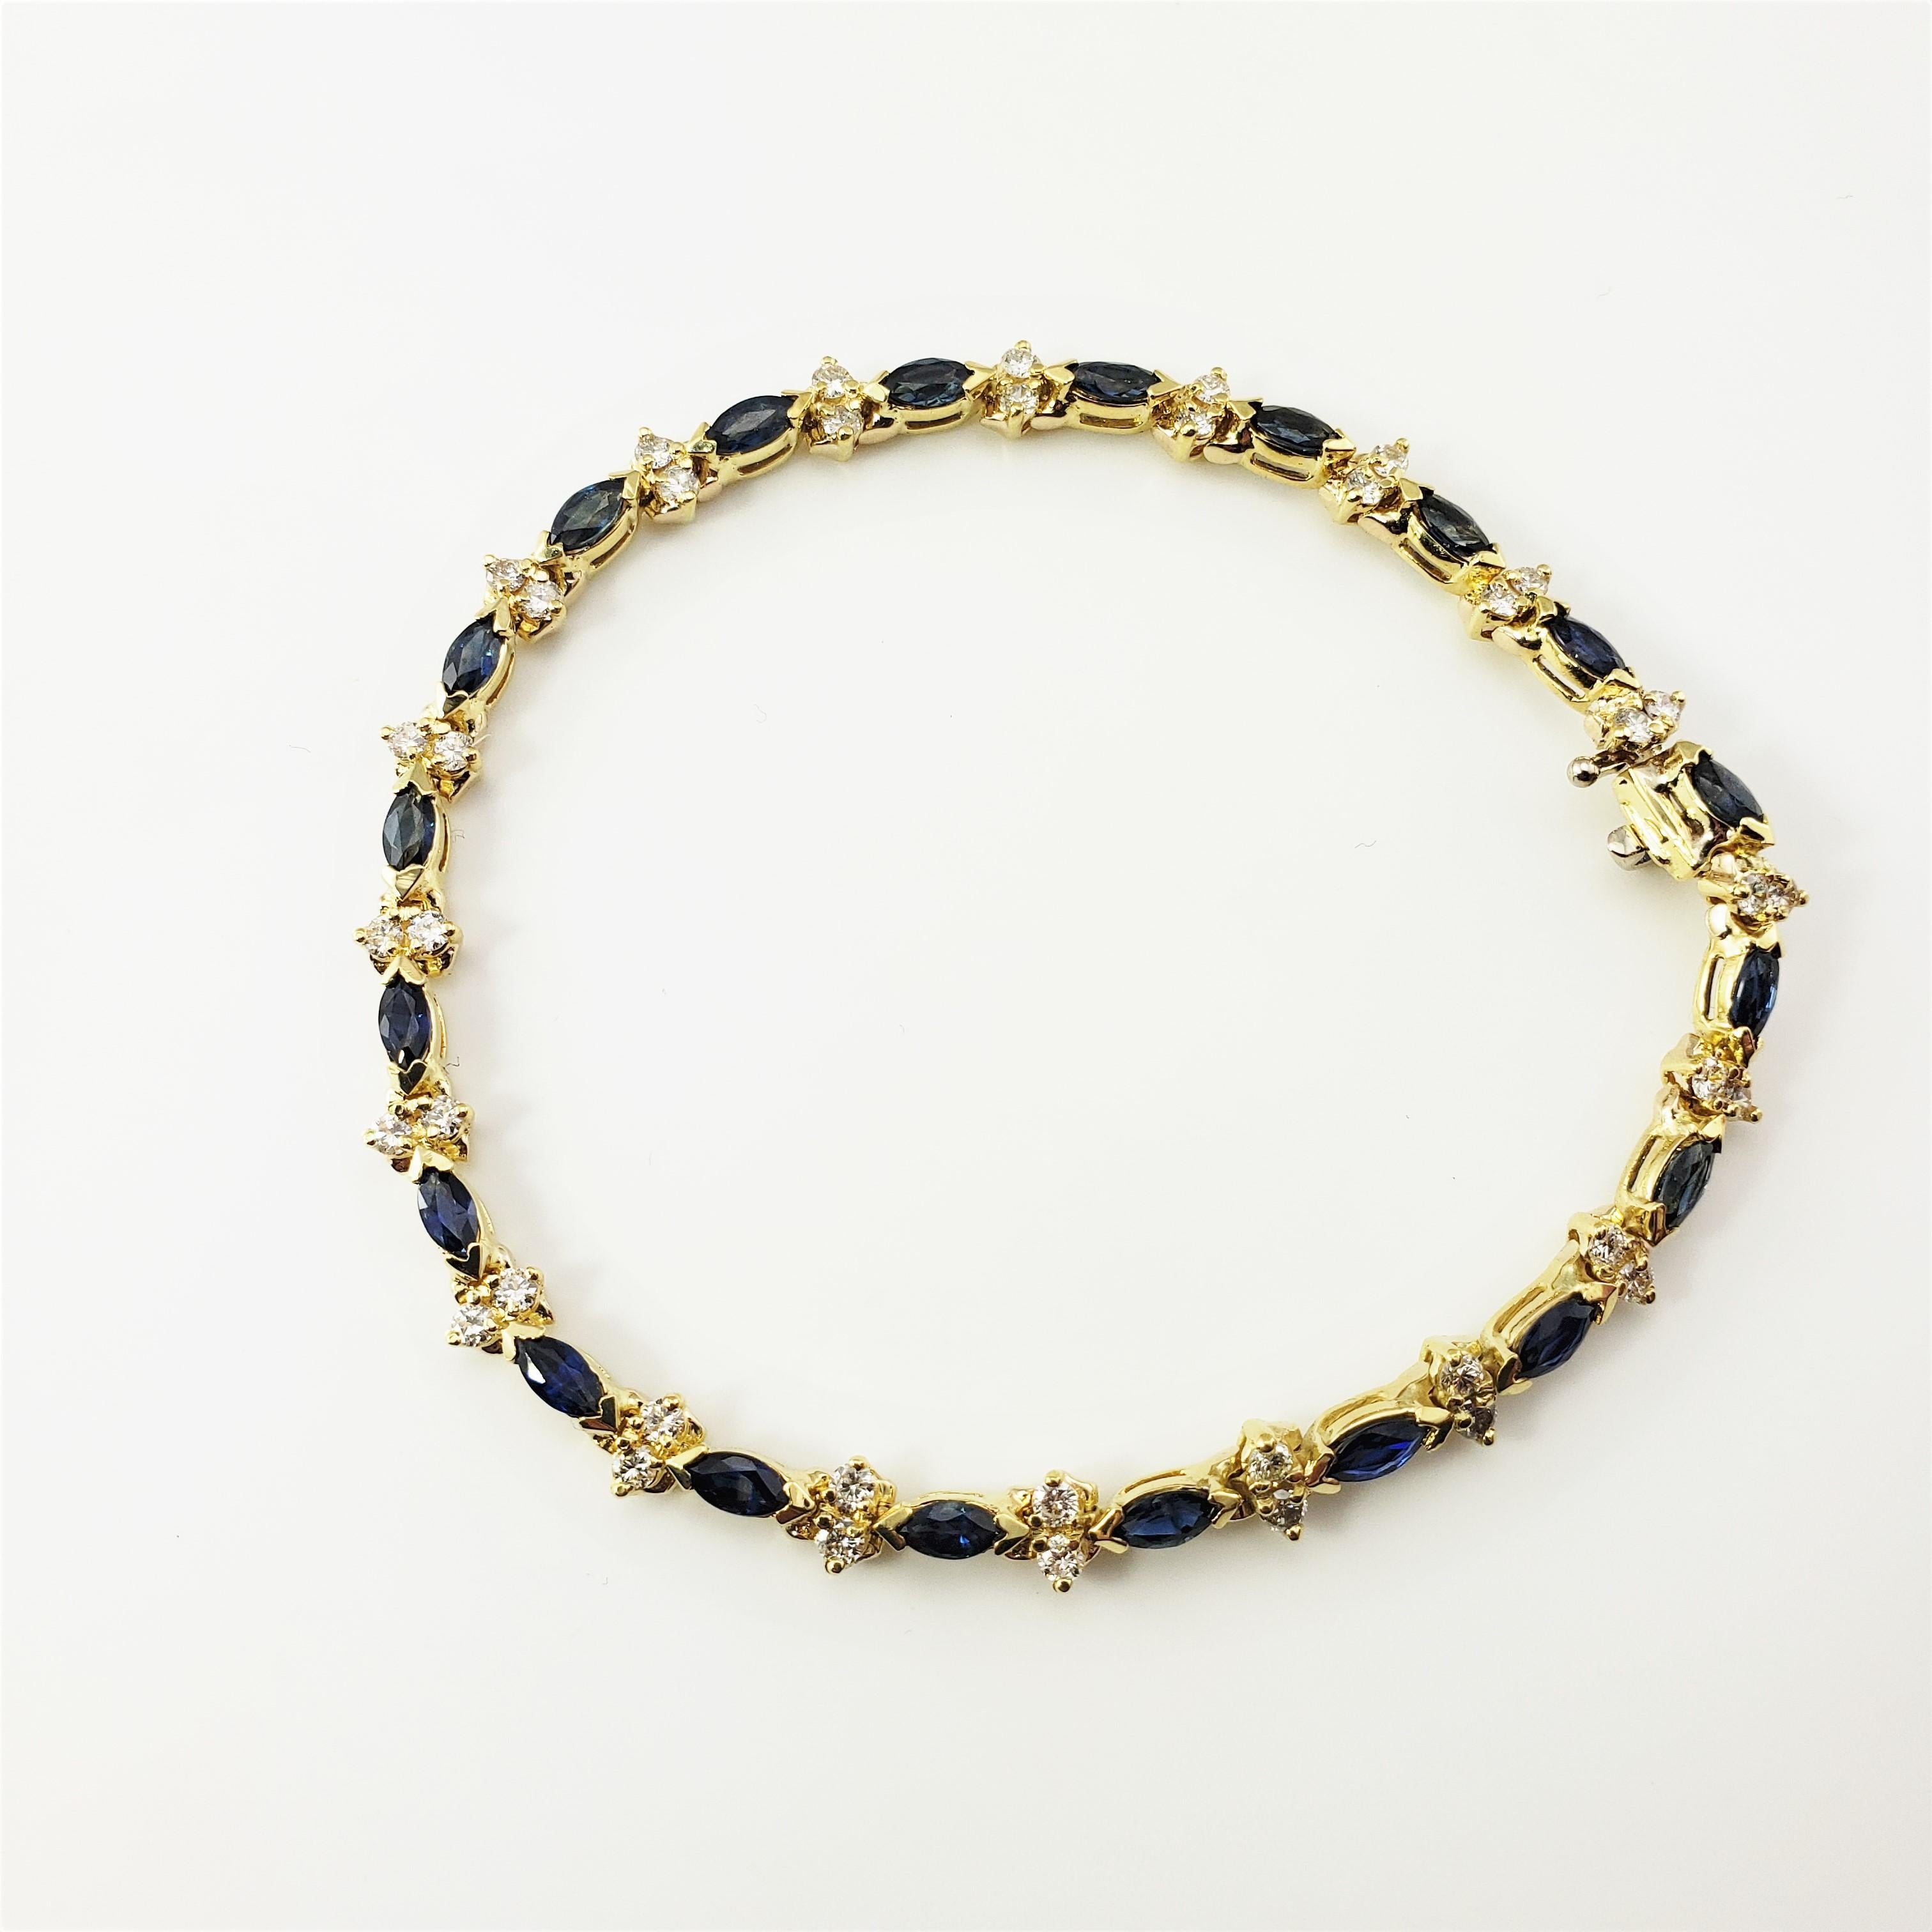 Vintage 18 Karat Yellow Gold Natural Sapphire and Diamond Bracelet-

This stunning bracelet features 20 natural marquis sapphires (approx. 6 mm x 3 mm) and 40 round brilliant cut diamonds set in classic 18K yellow gold.  

Width: 5 mm.

Approximate